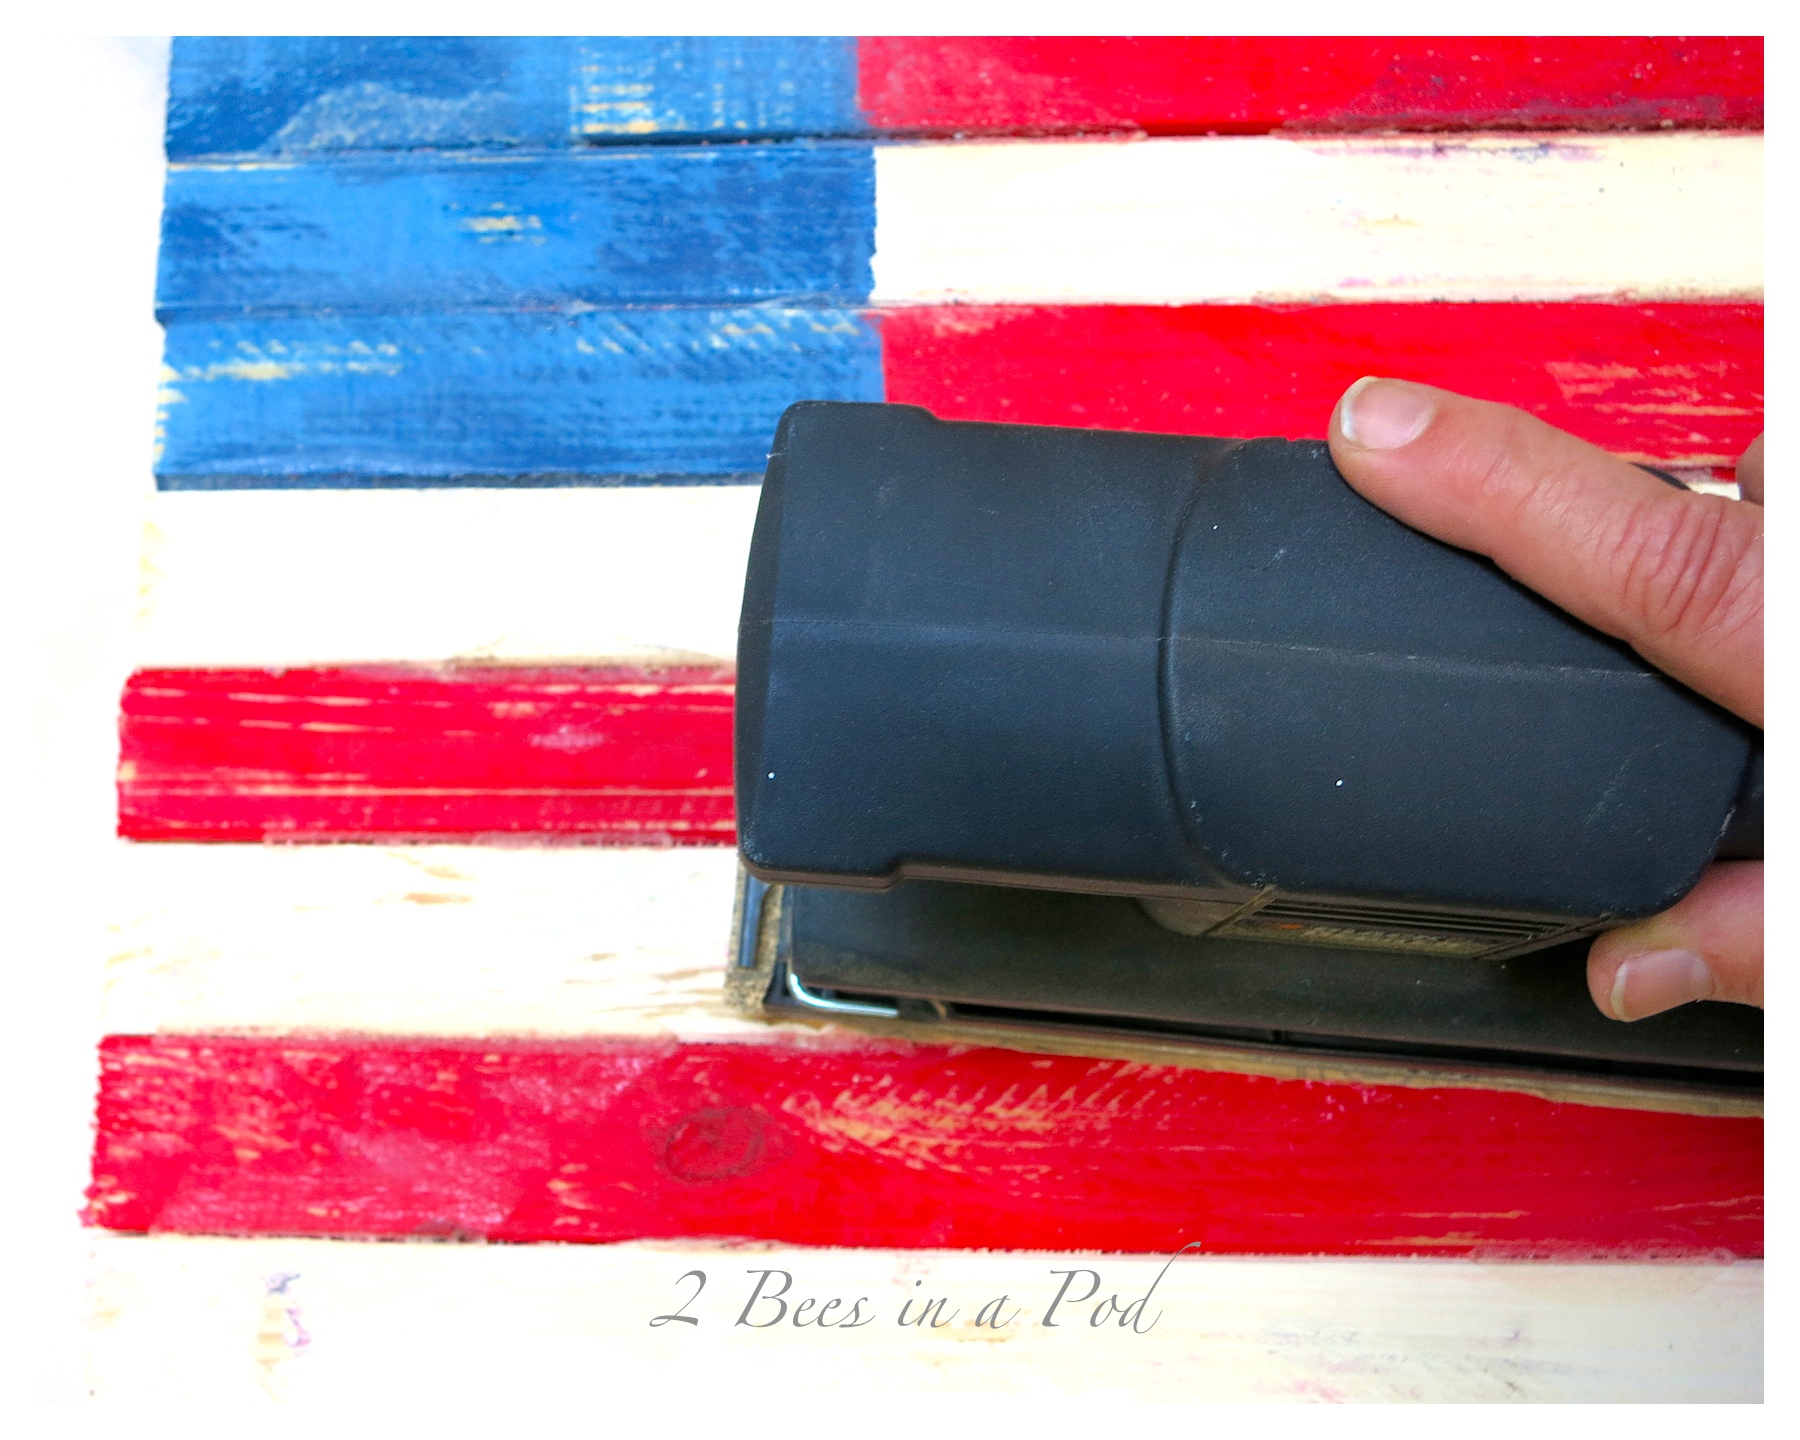 DIY tutorial - USA wooden flag made using grade stake pickets from the hardware store. Used a sander and waxes to give the flag a vintage, rustic antique finish. I'm proud to be an American :)